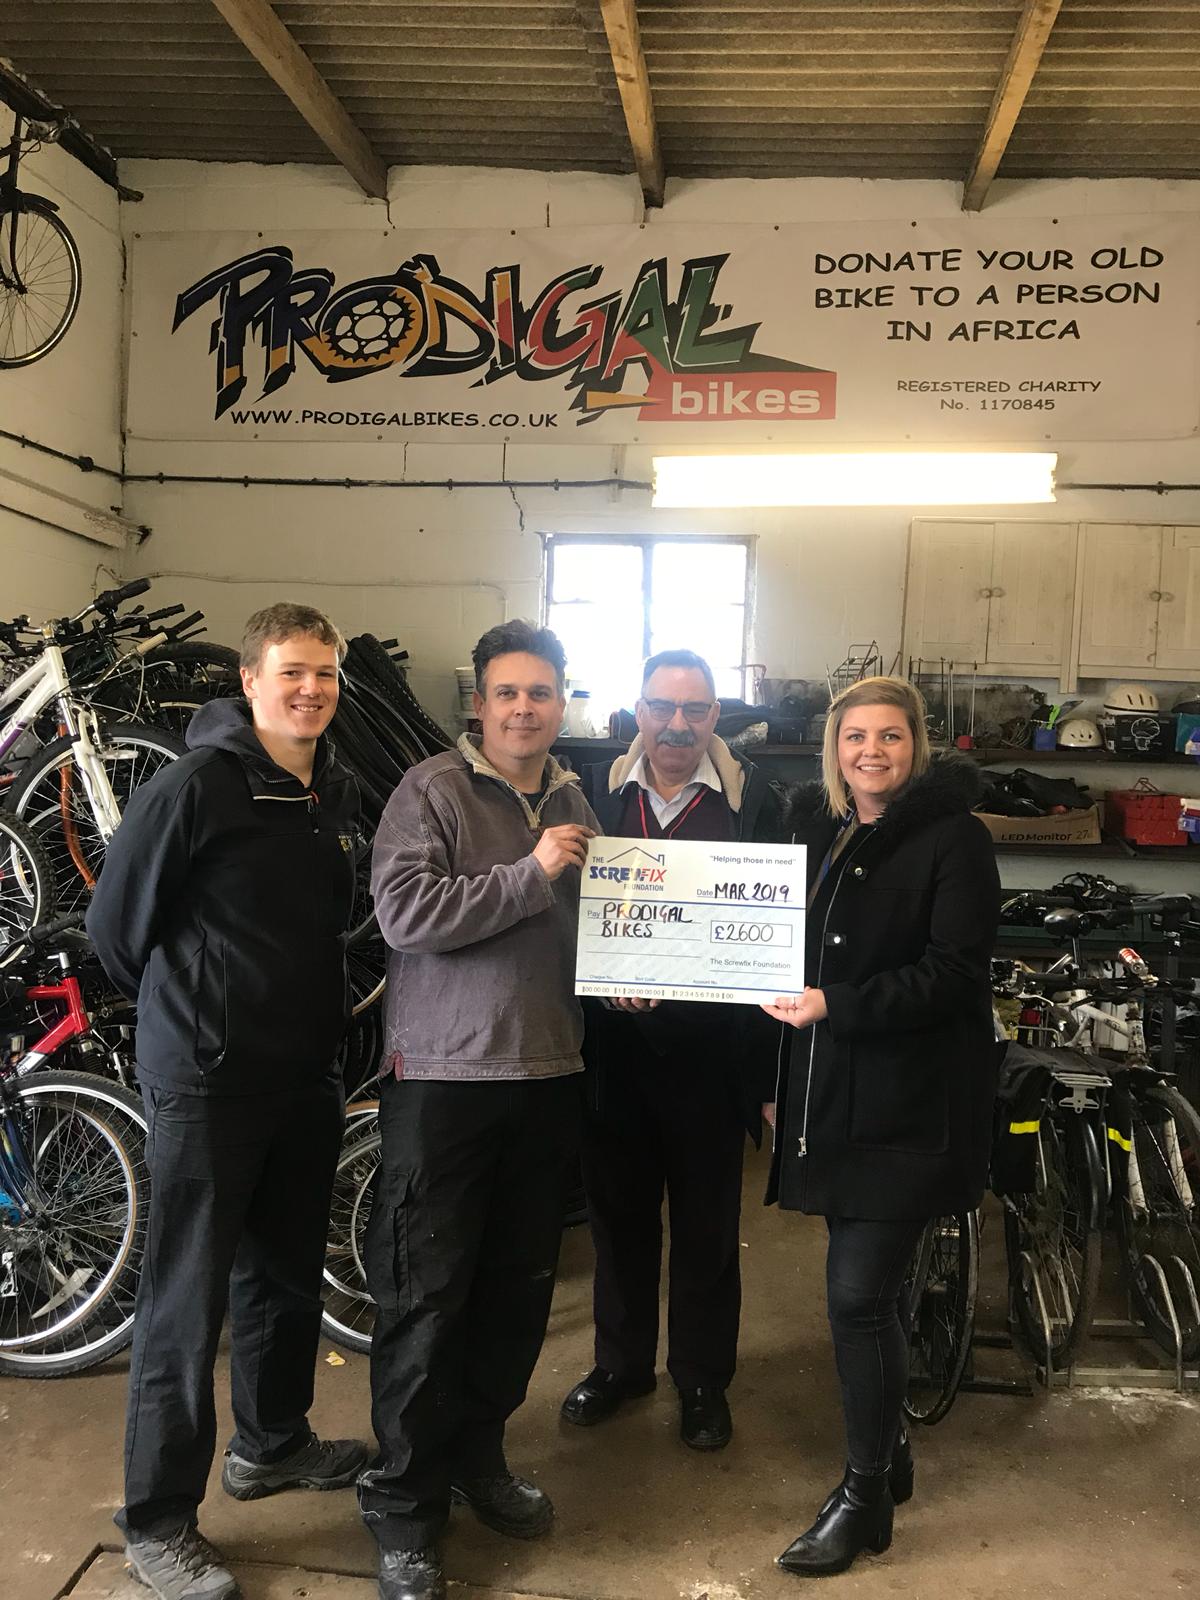 Prodigal bikes gets a helping hand from the Screwfix Foundation